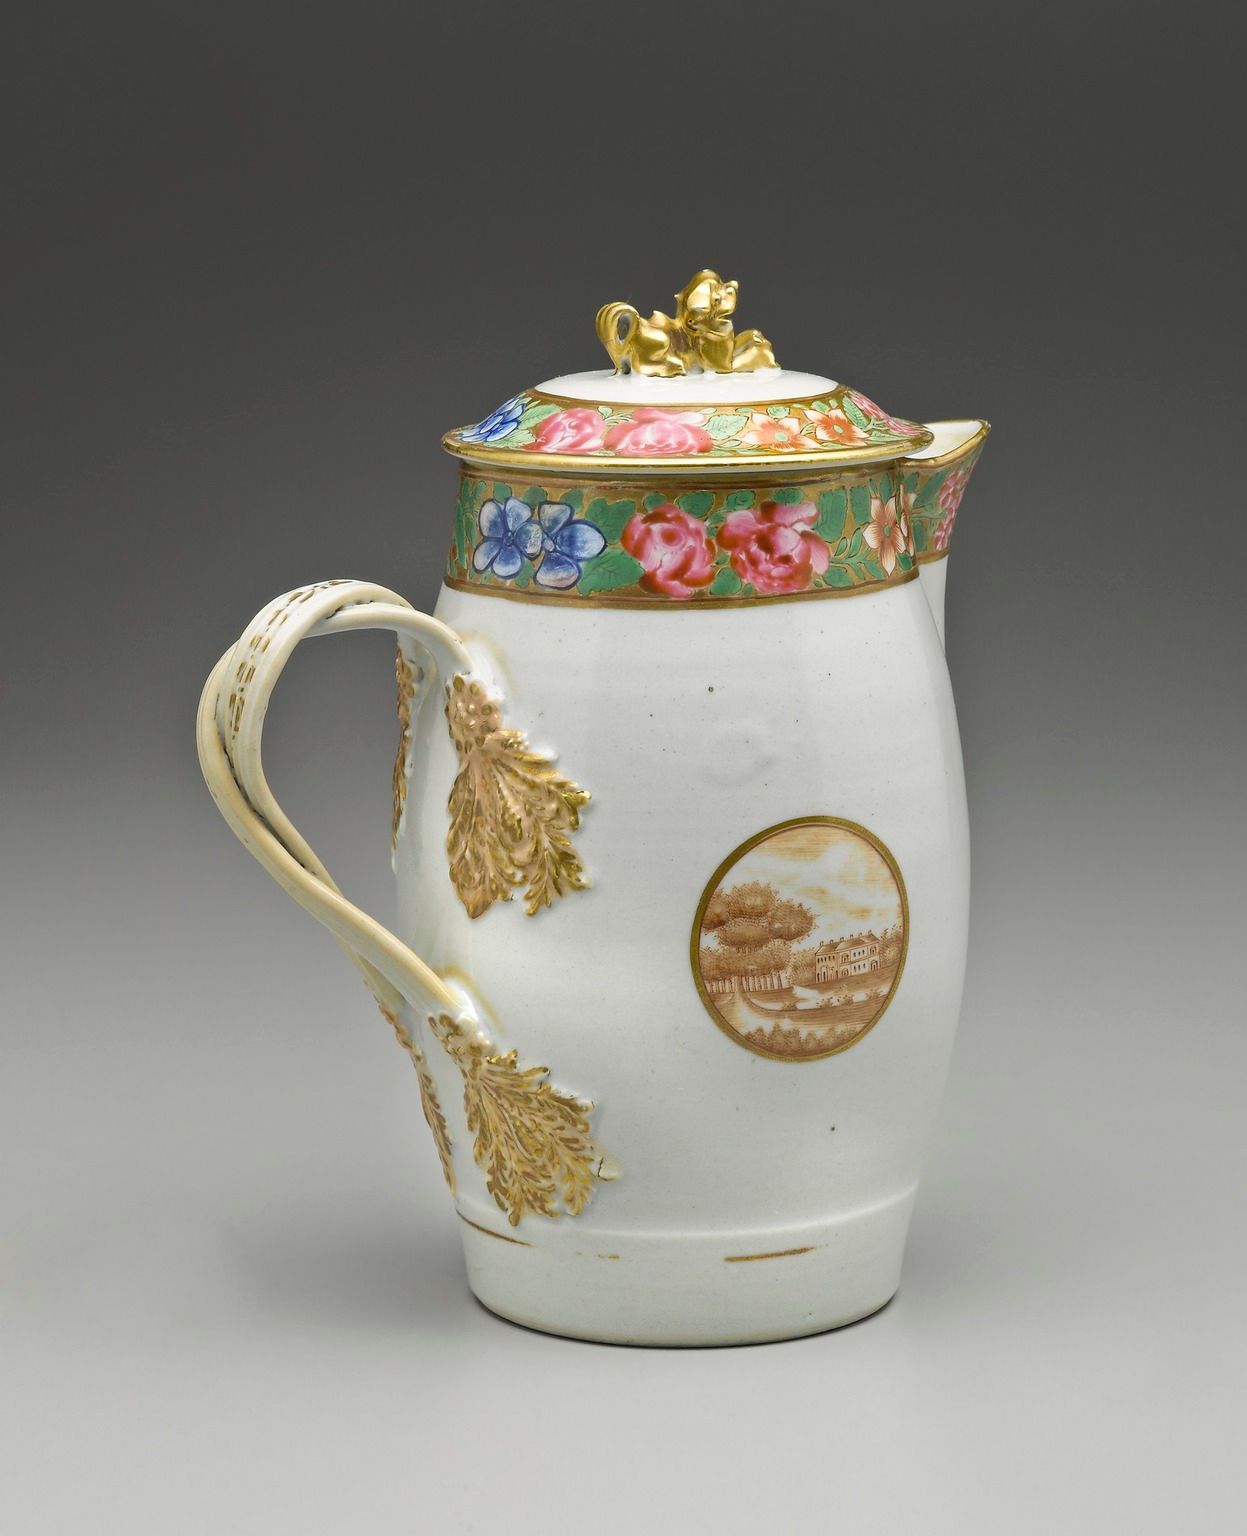 A white porcelain jug with a handle and lid. The jug features a landscape on the side and a floral motif around the top of the jug, and a sculpture of a crouching dog on top of the lid.